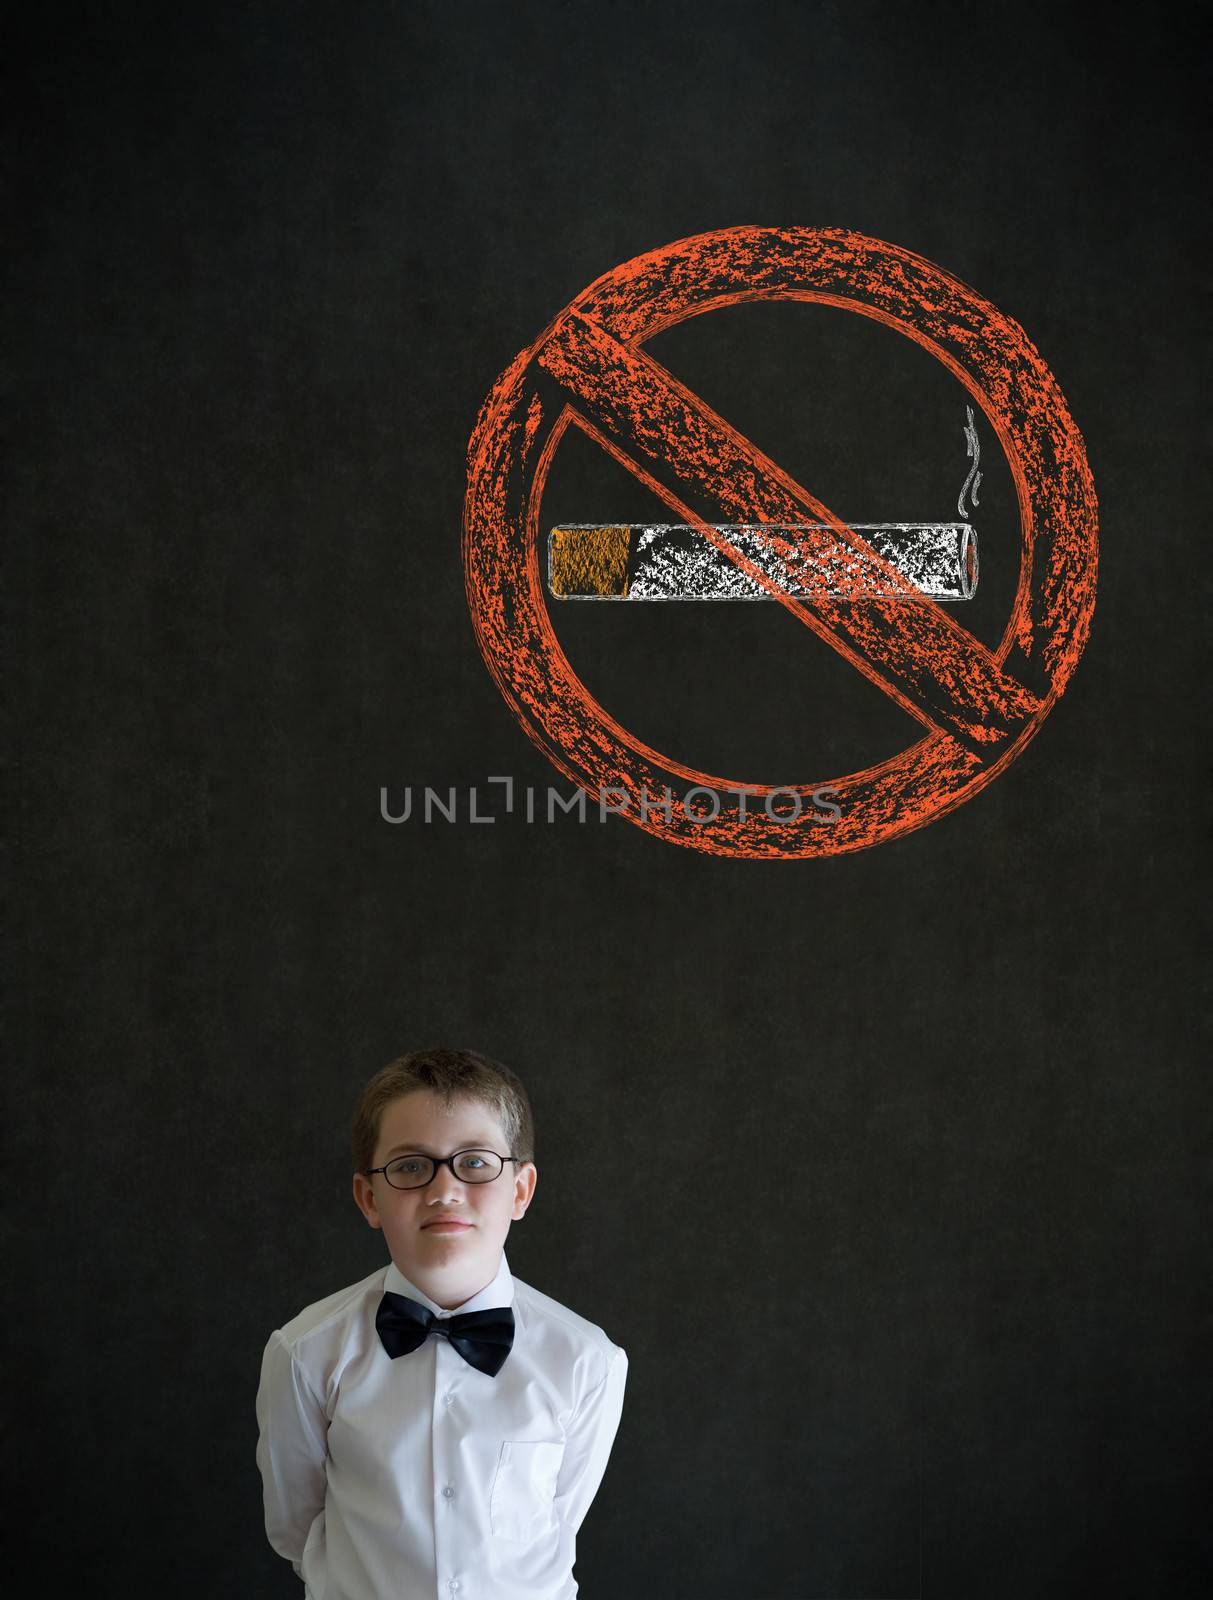 Thinking boy dressed up as business man with no smoking chalk sign on blackboard background